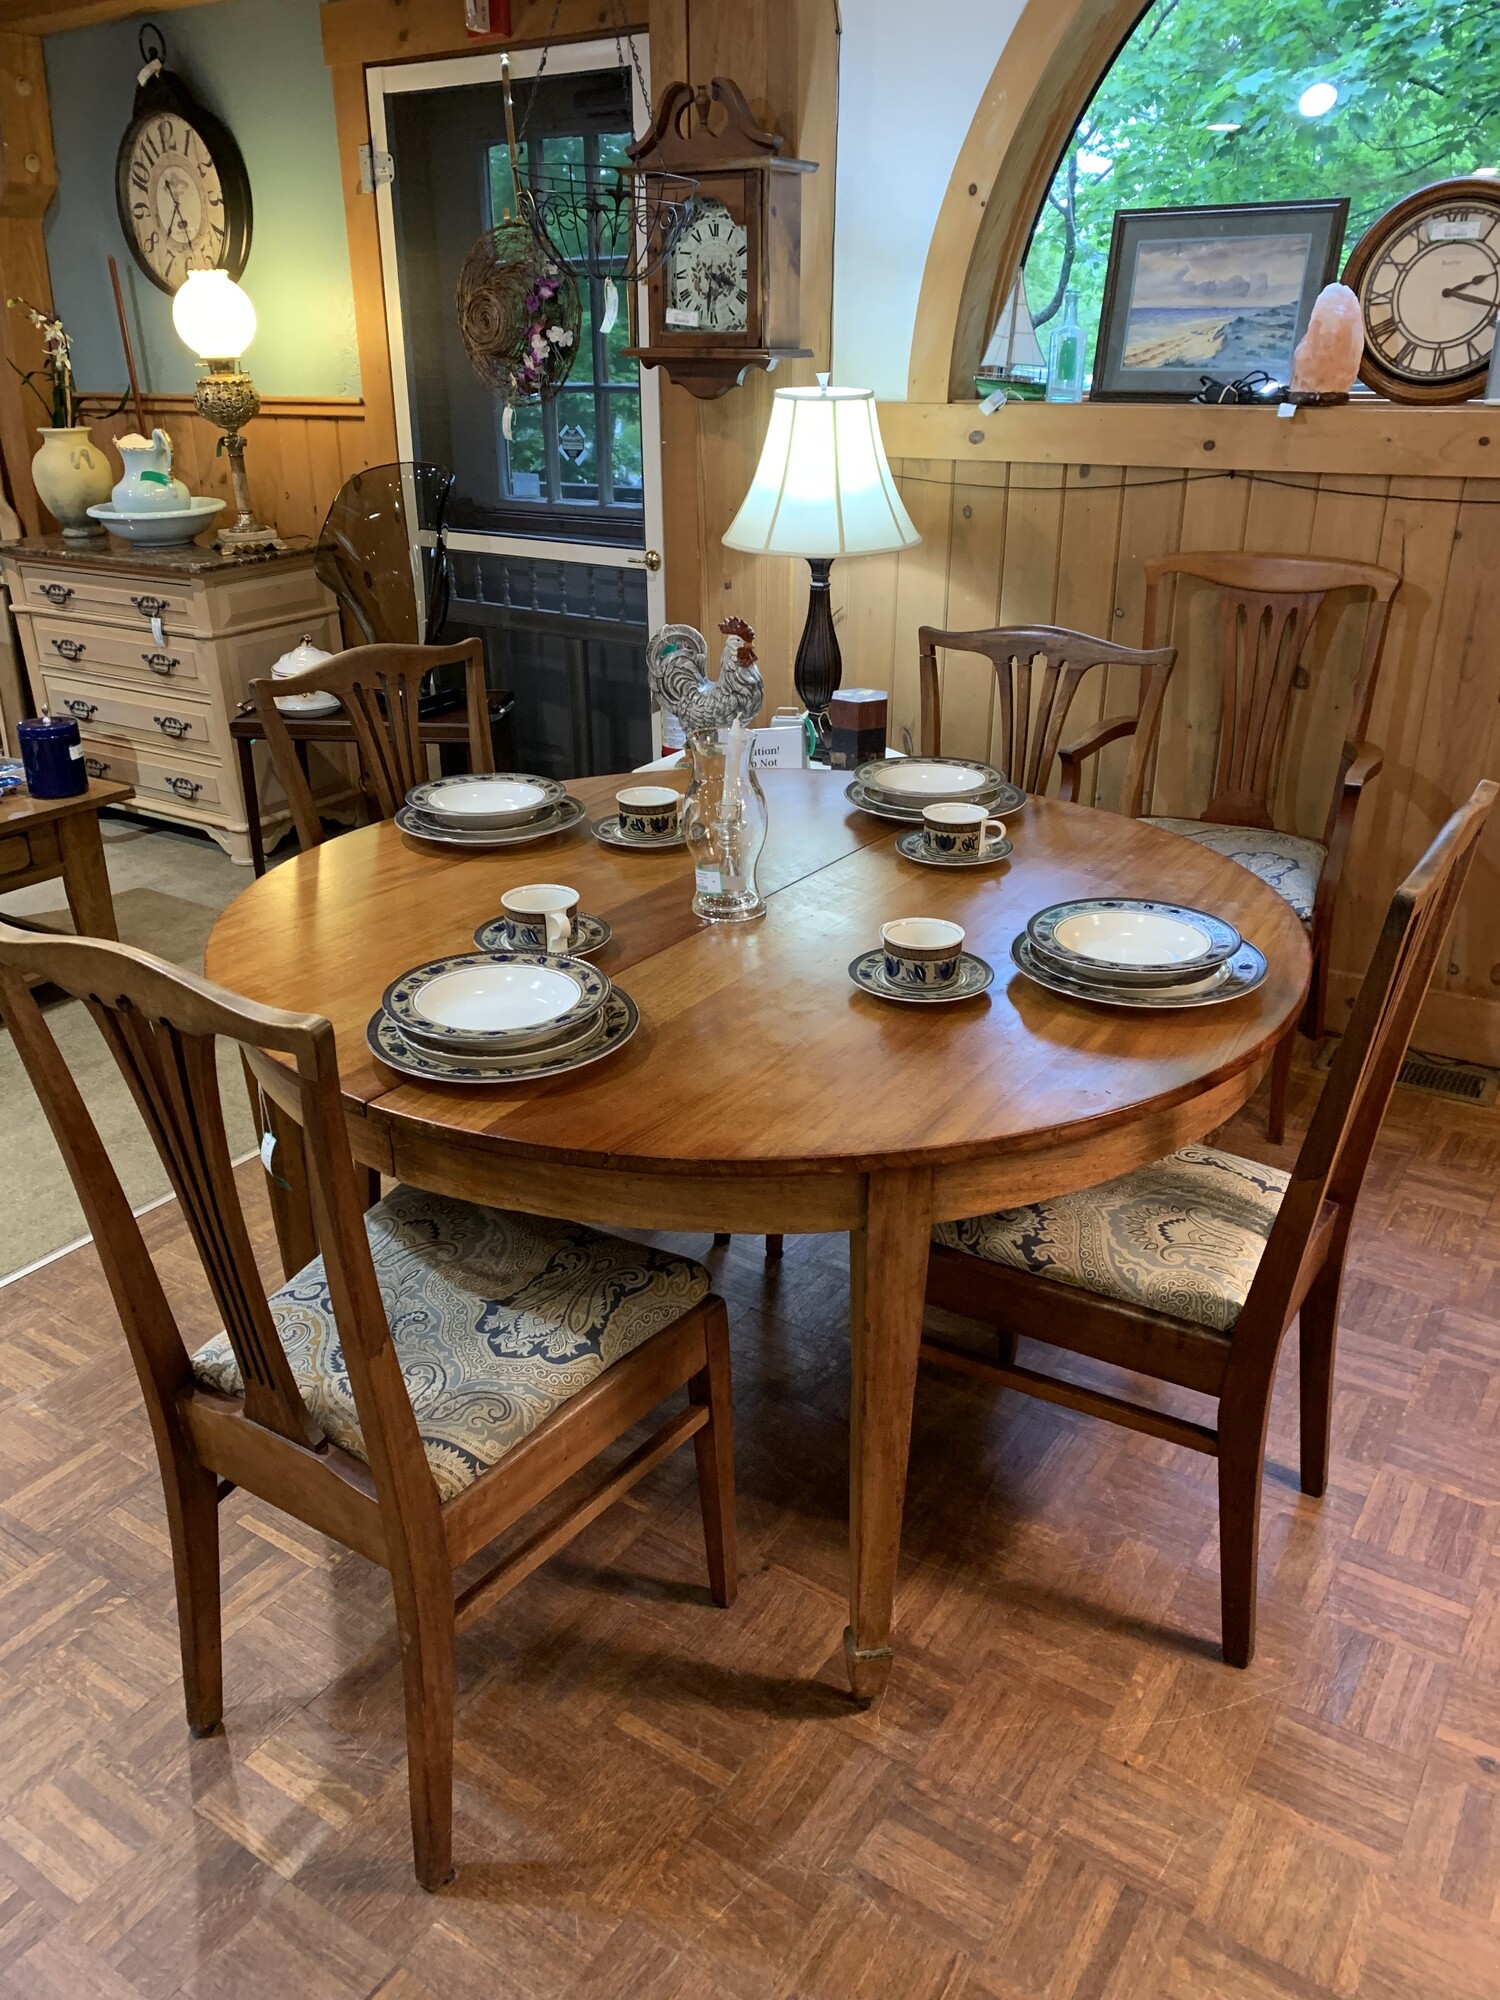 Oak Table W/5 Chrs & Leaf
54 in Round 29 in High 10 1/2 in Leaf
Beautiful Oak table made by the Conant Ball Co in Boston.  There are 5 upholstered chairs - one of them is an arm chair.  It is in wonderful conditon; a true heirloom. Ther is one leaf which extends the table by 10 1/2 inches make it 64 1/2 inches wide.